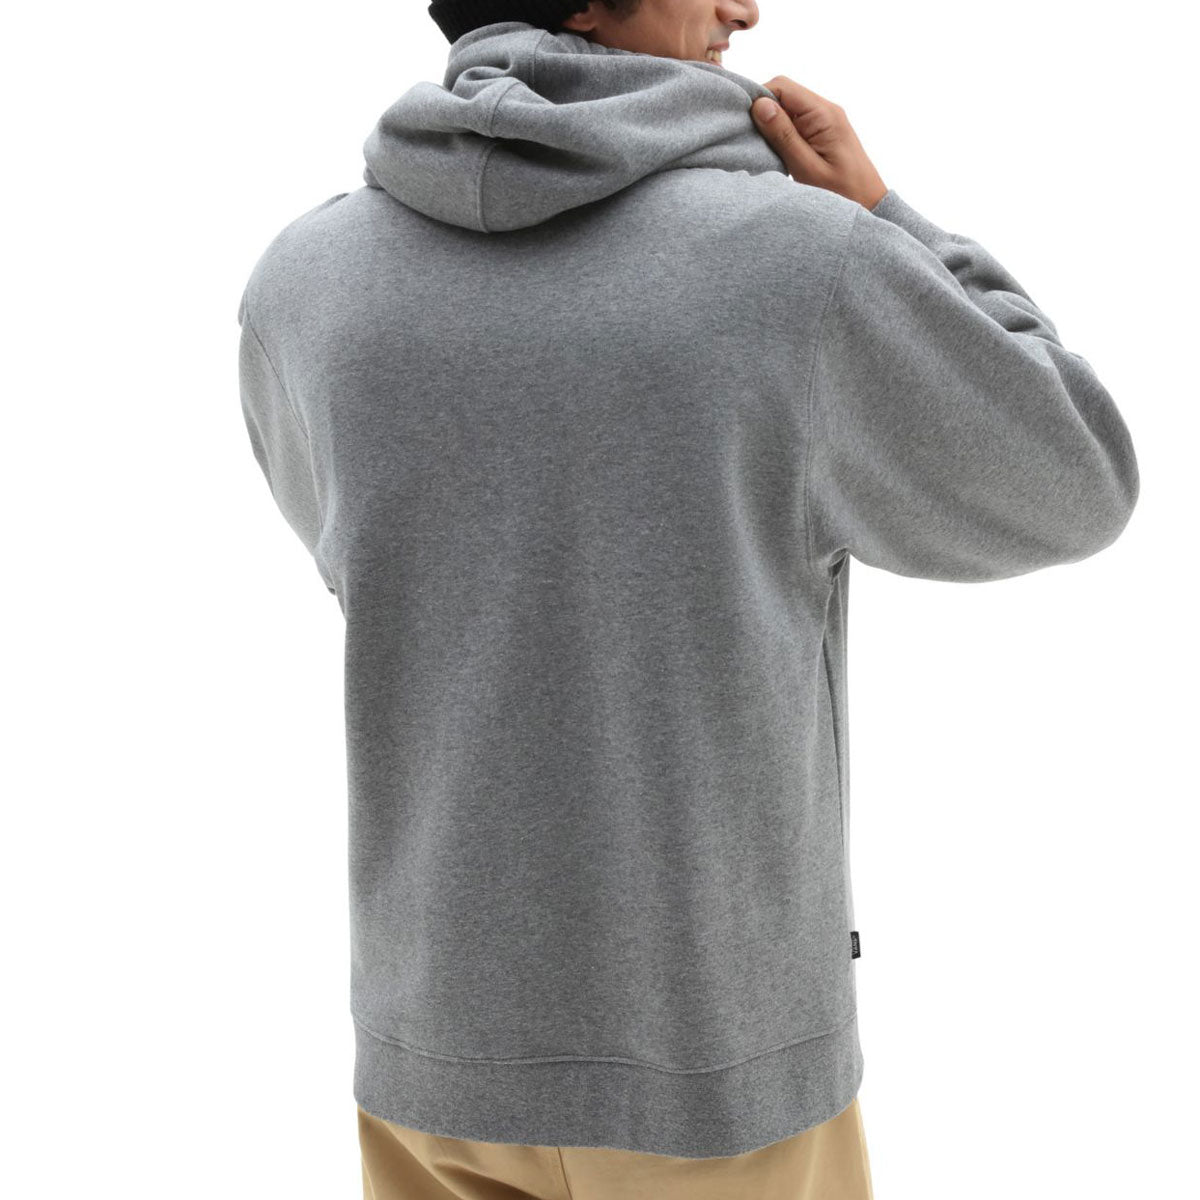 Vans Skate Classics Patch Hoodie - Cement Heather image 3